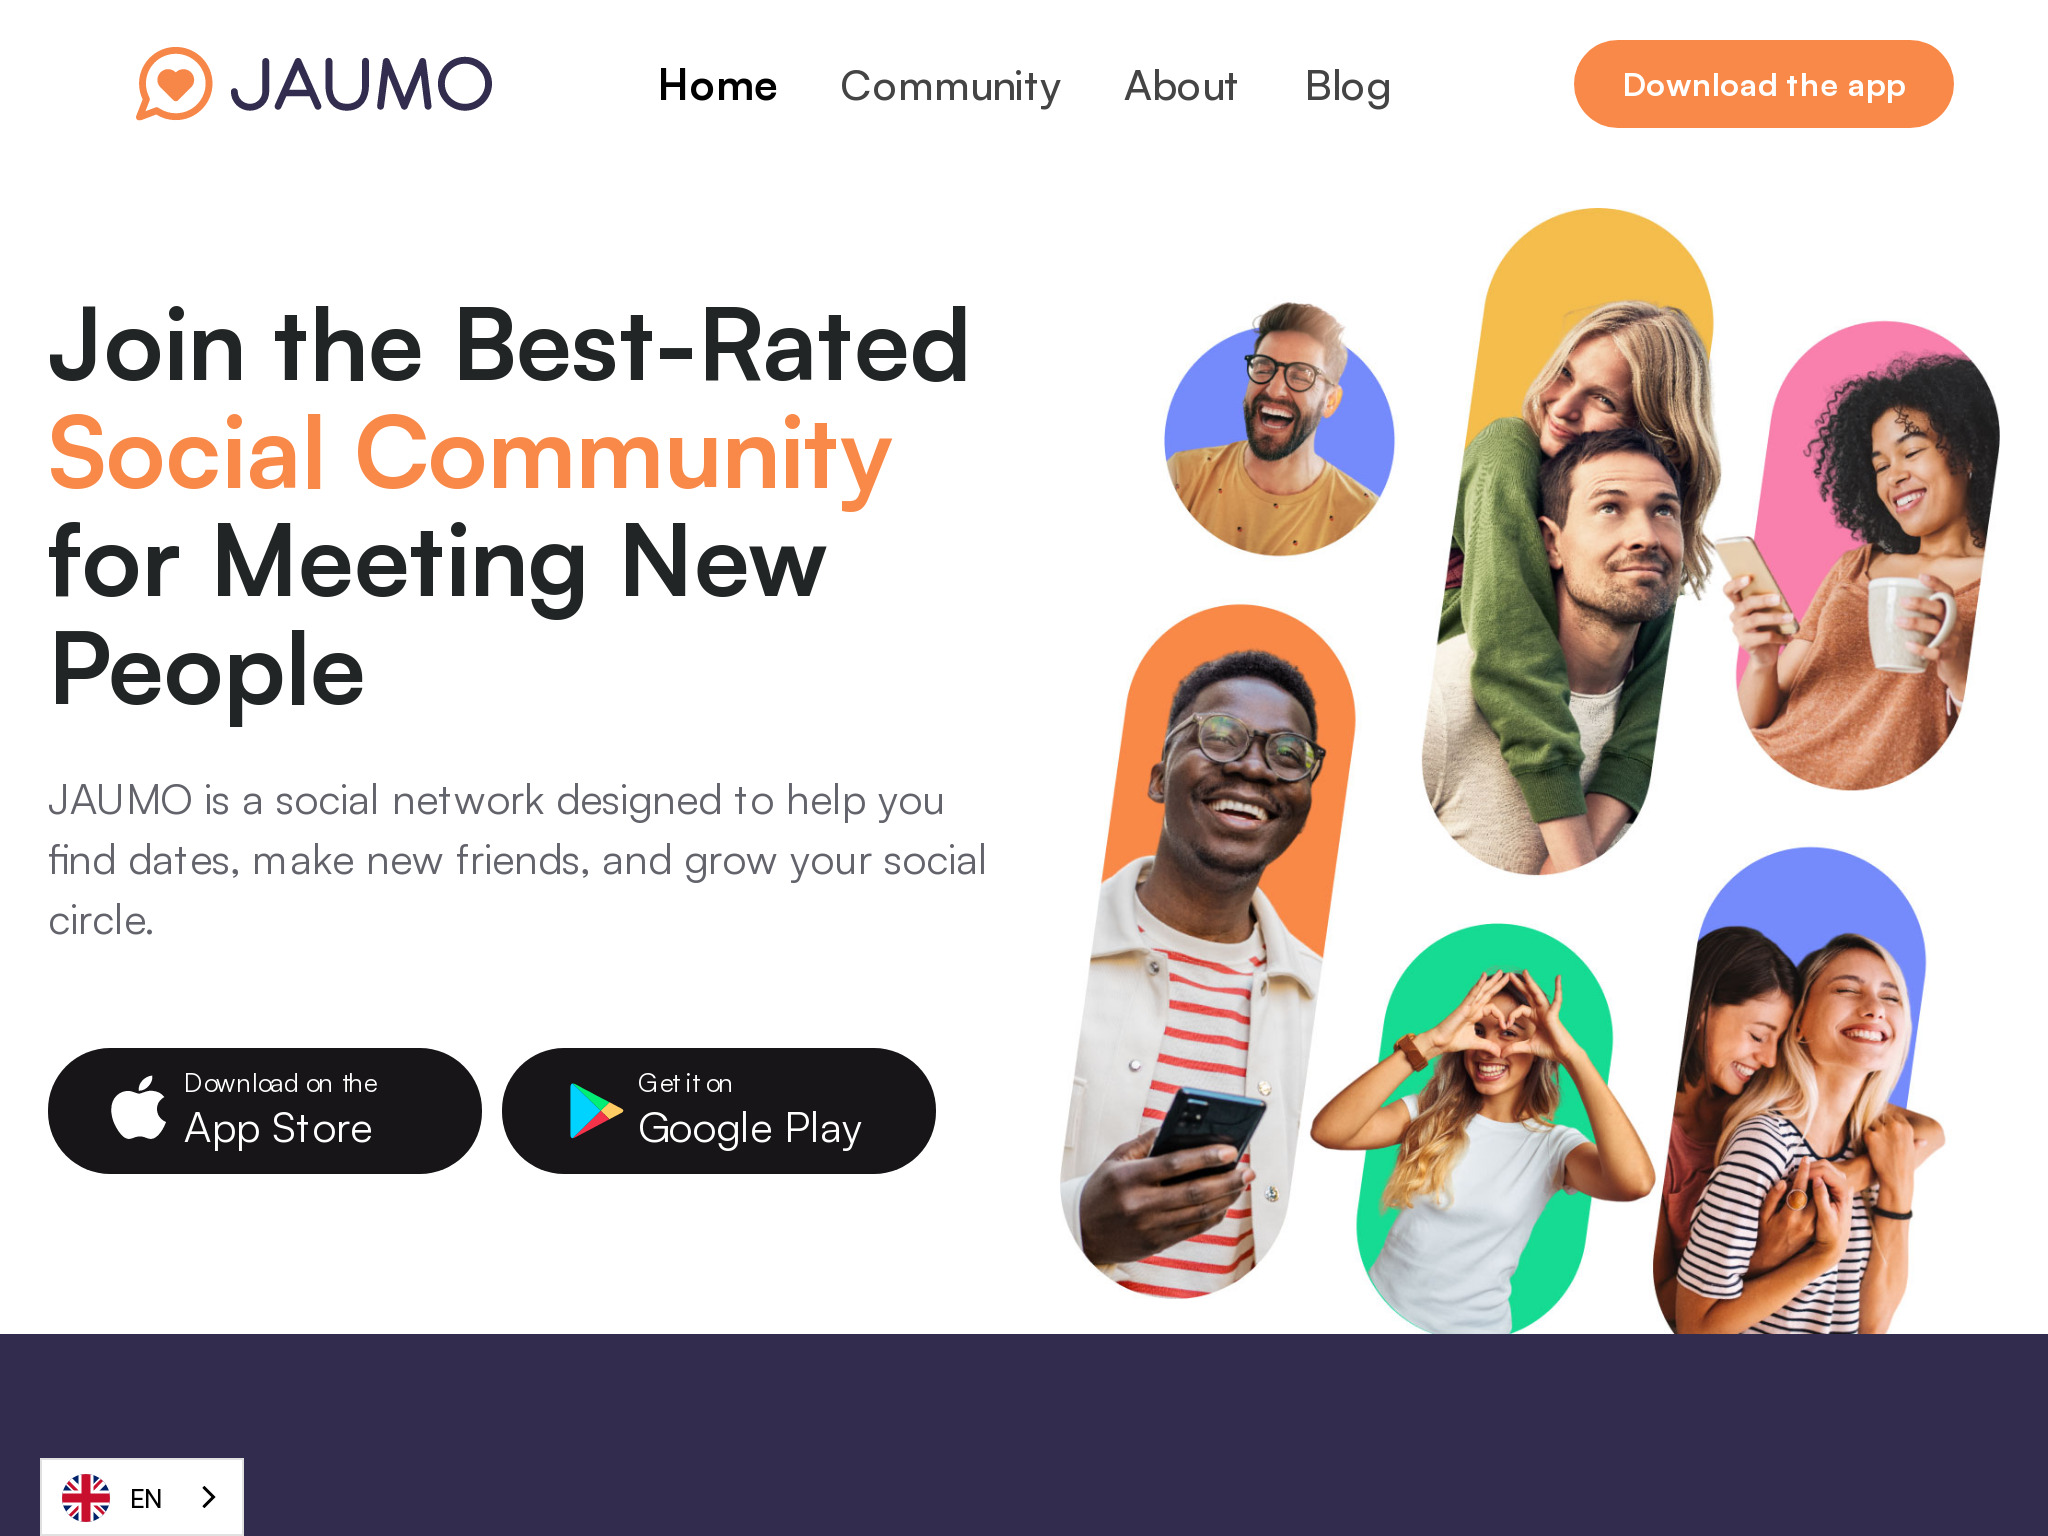 Finding Romance Online – Jaumo Review